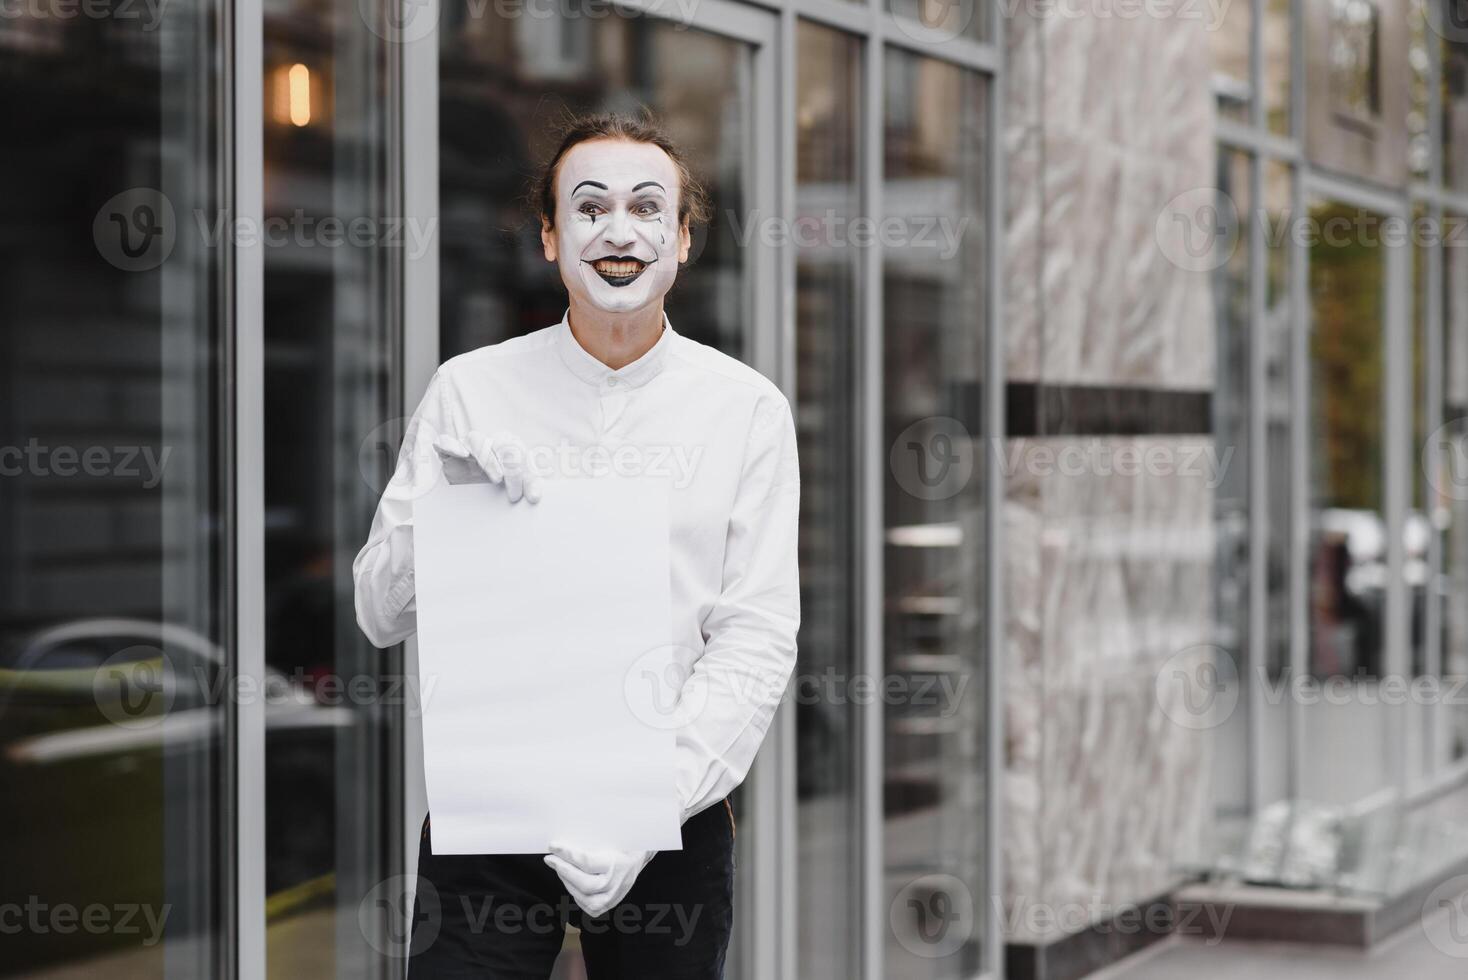 Your text here. Actor mime holding empty white letter. Colorful portrait with gray background. April fools day photo